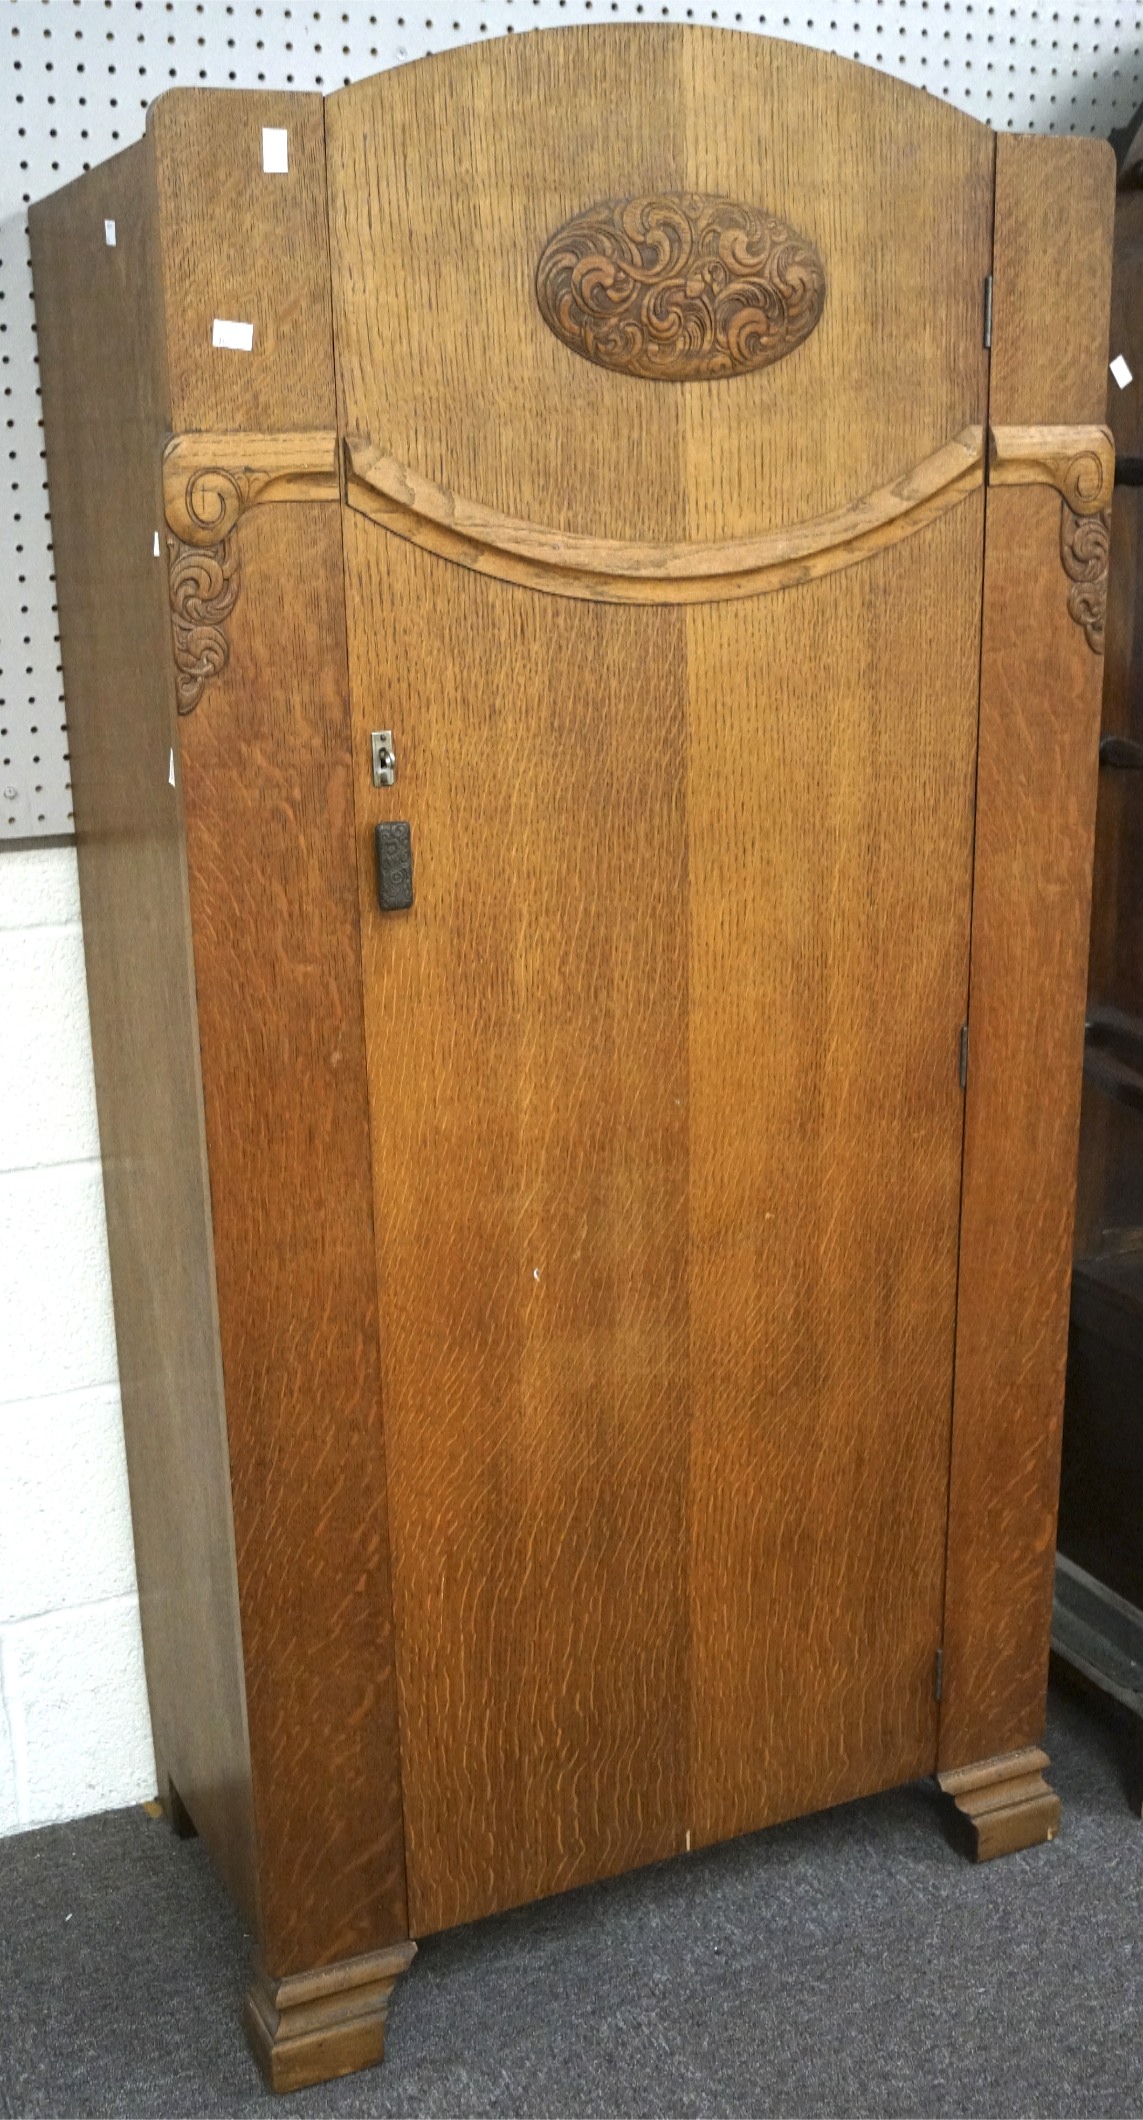 A mid century oak wardrobe, the front adorned with carved scrolling motifs,